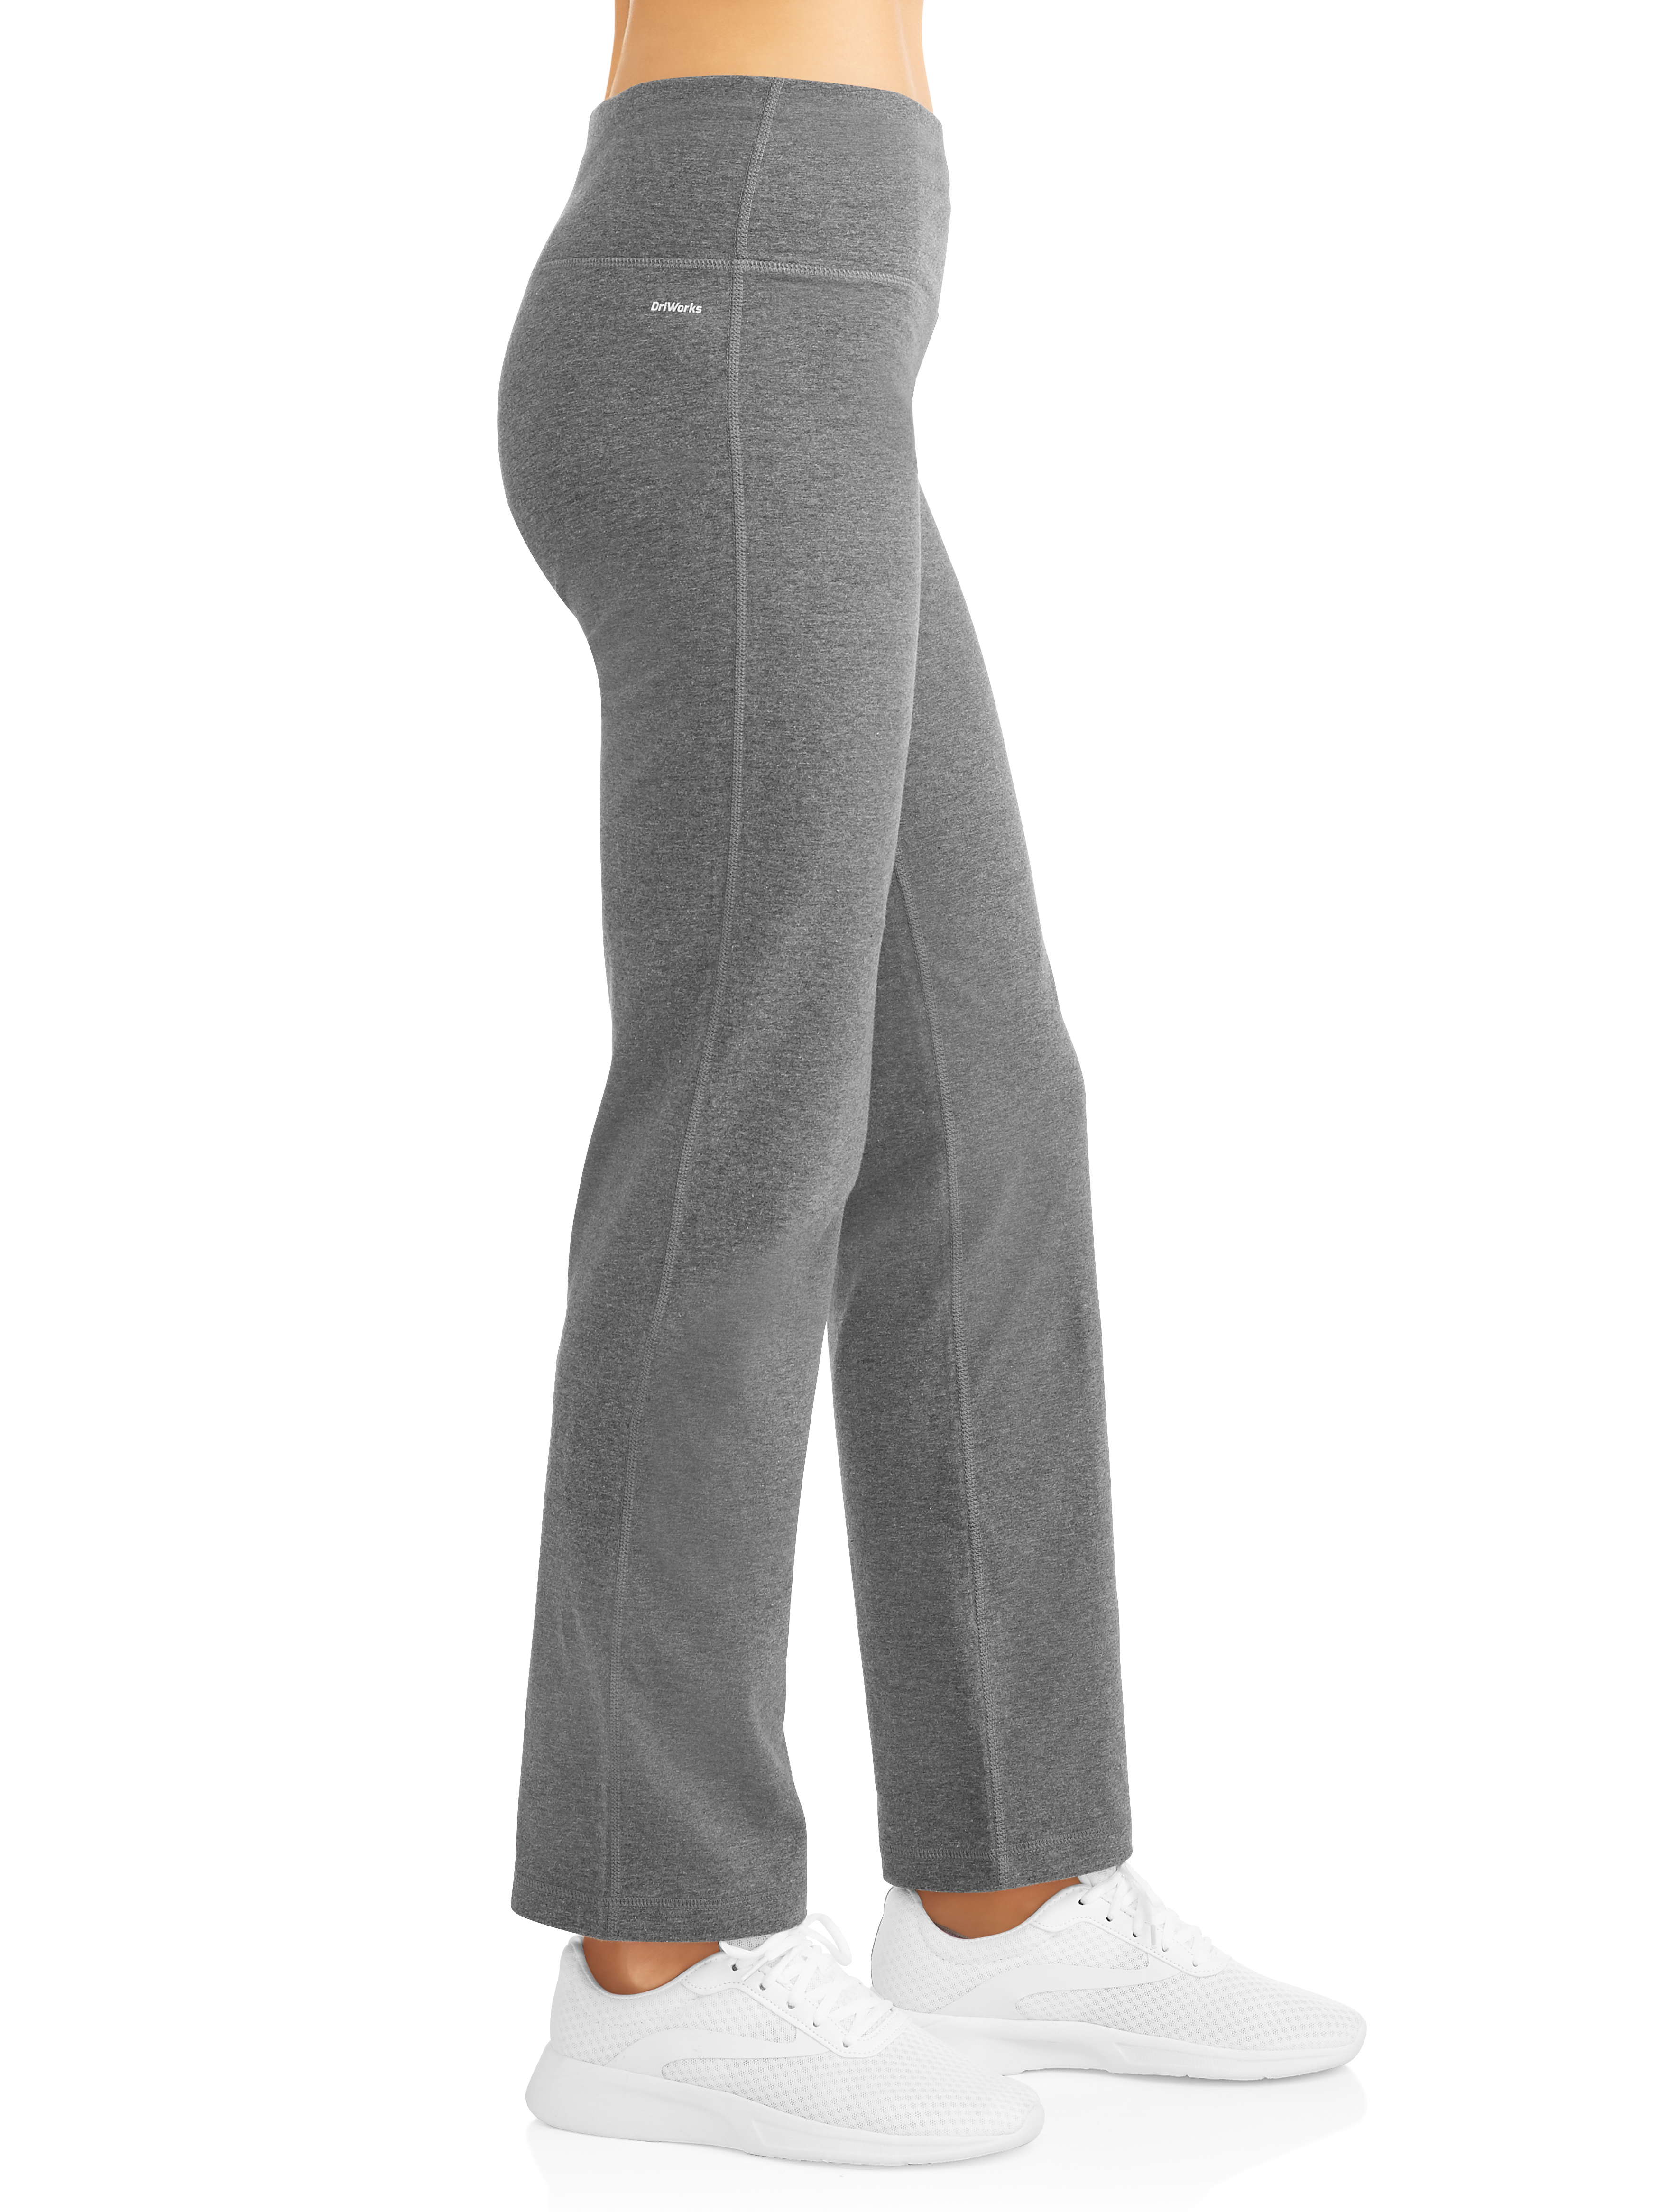 Athletic Works Women's Athleisure Performance Straight Leg Pant Available in Regular and Petite - image 3 of 4